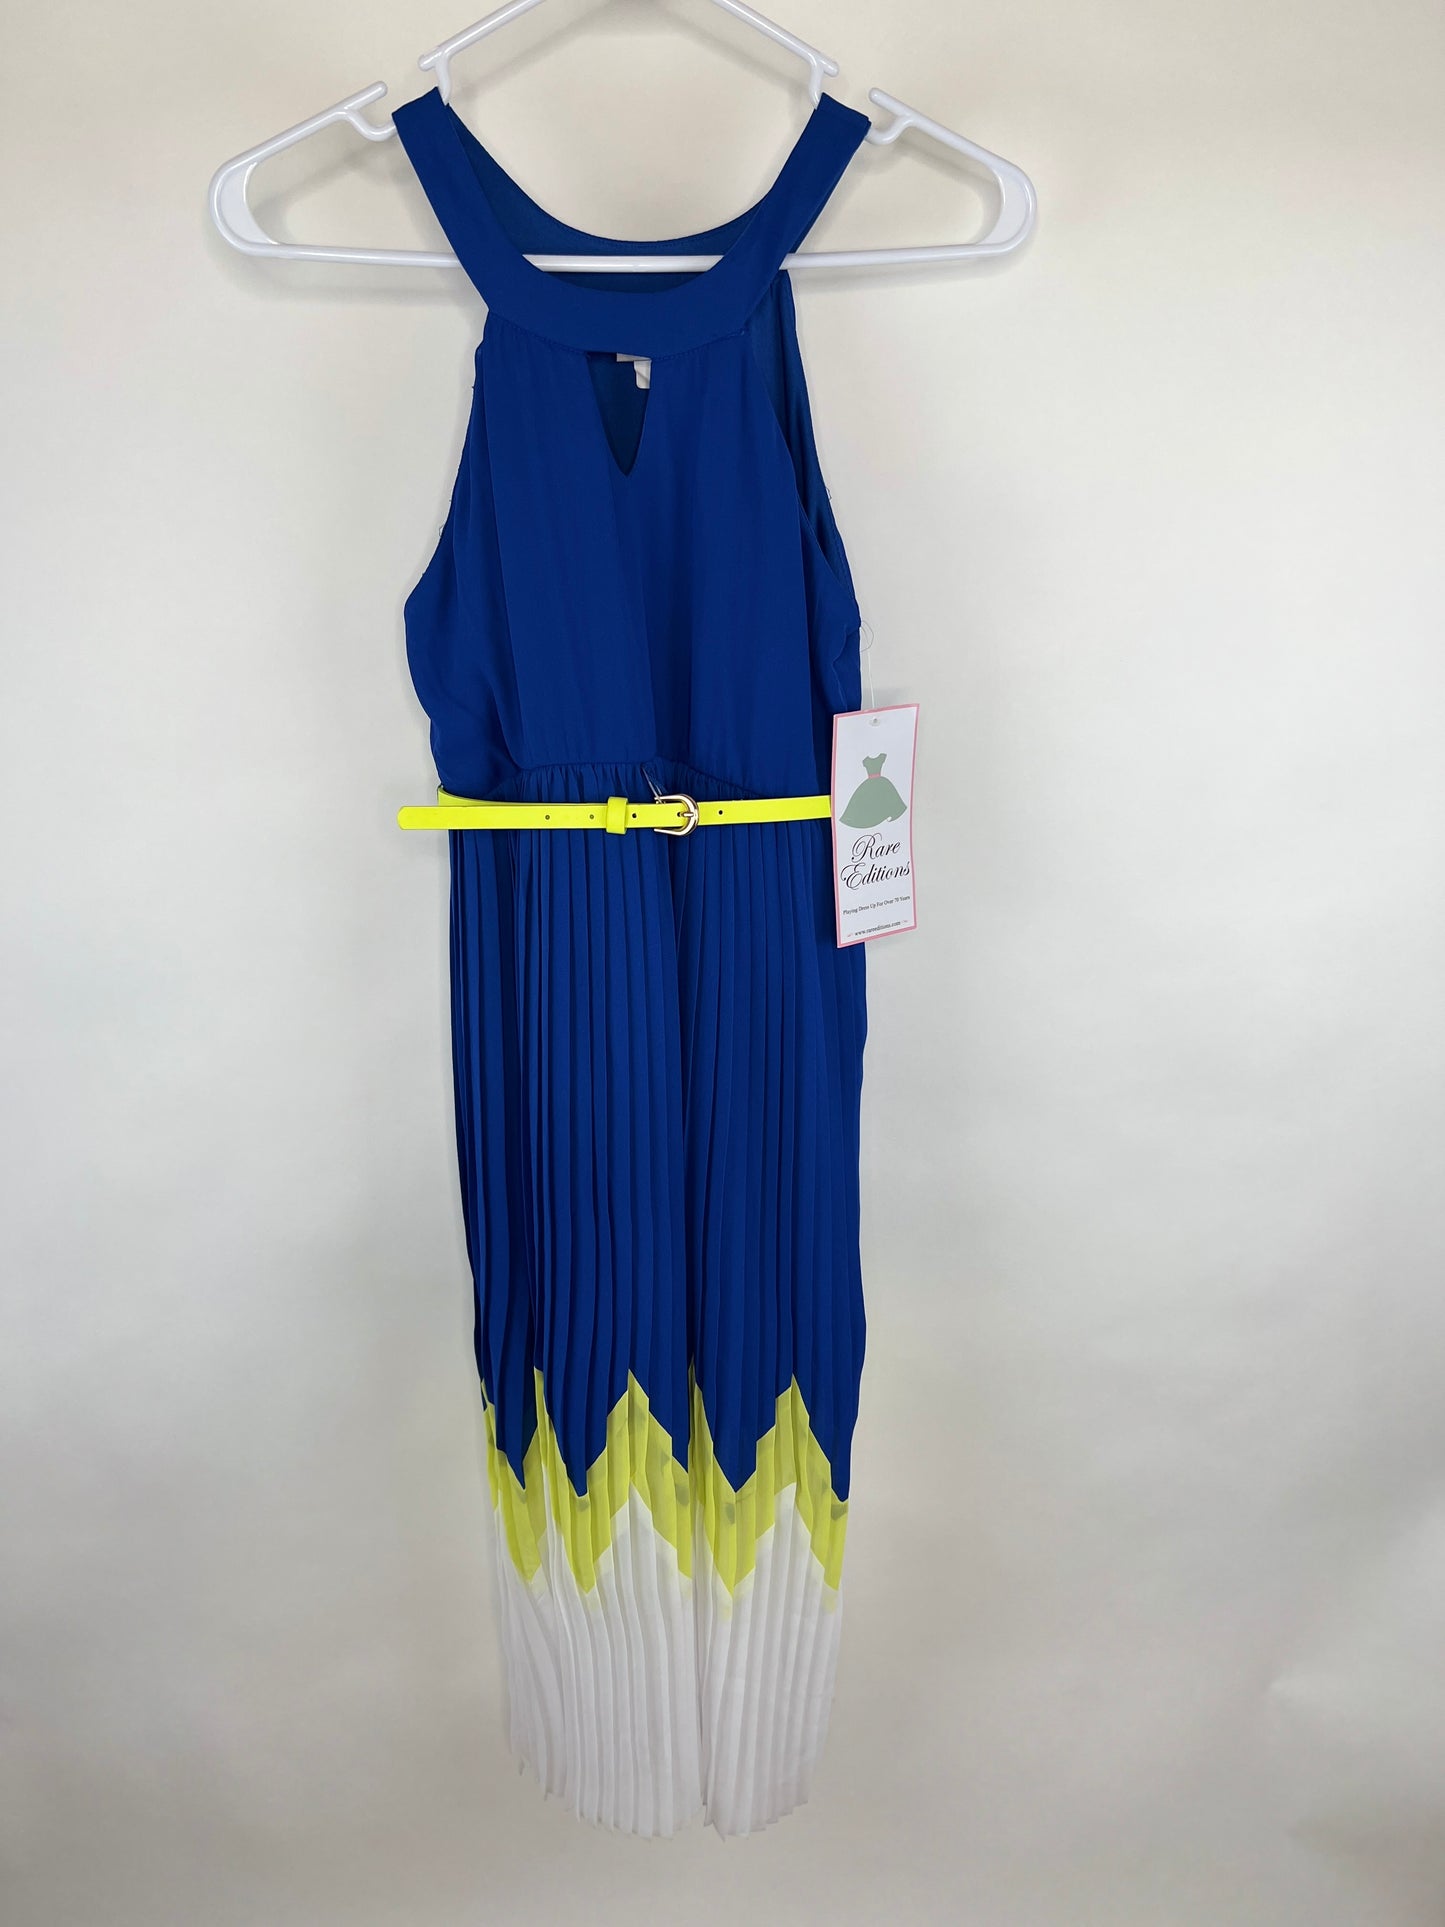 NWT - Rare Editions Cobalt Blue Belted Pleat Dress - M (10)